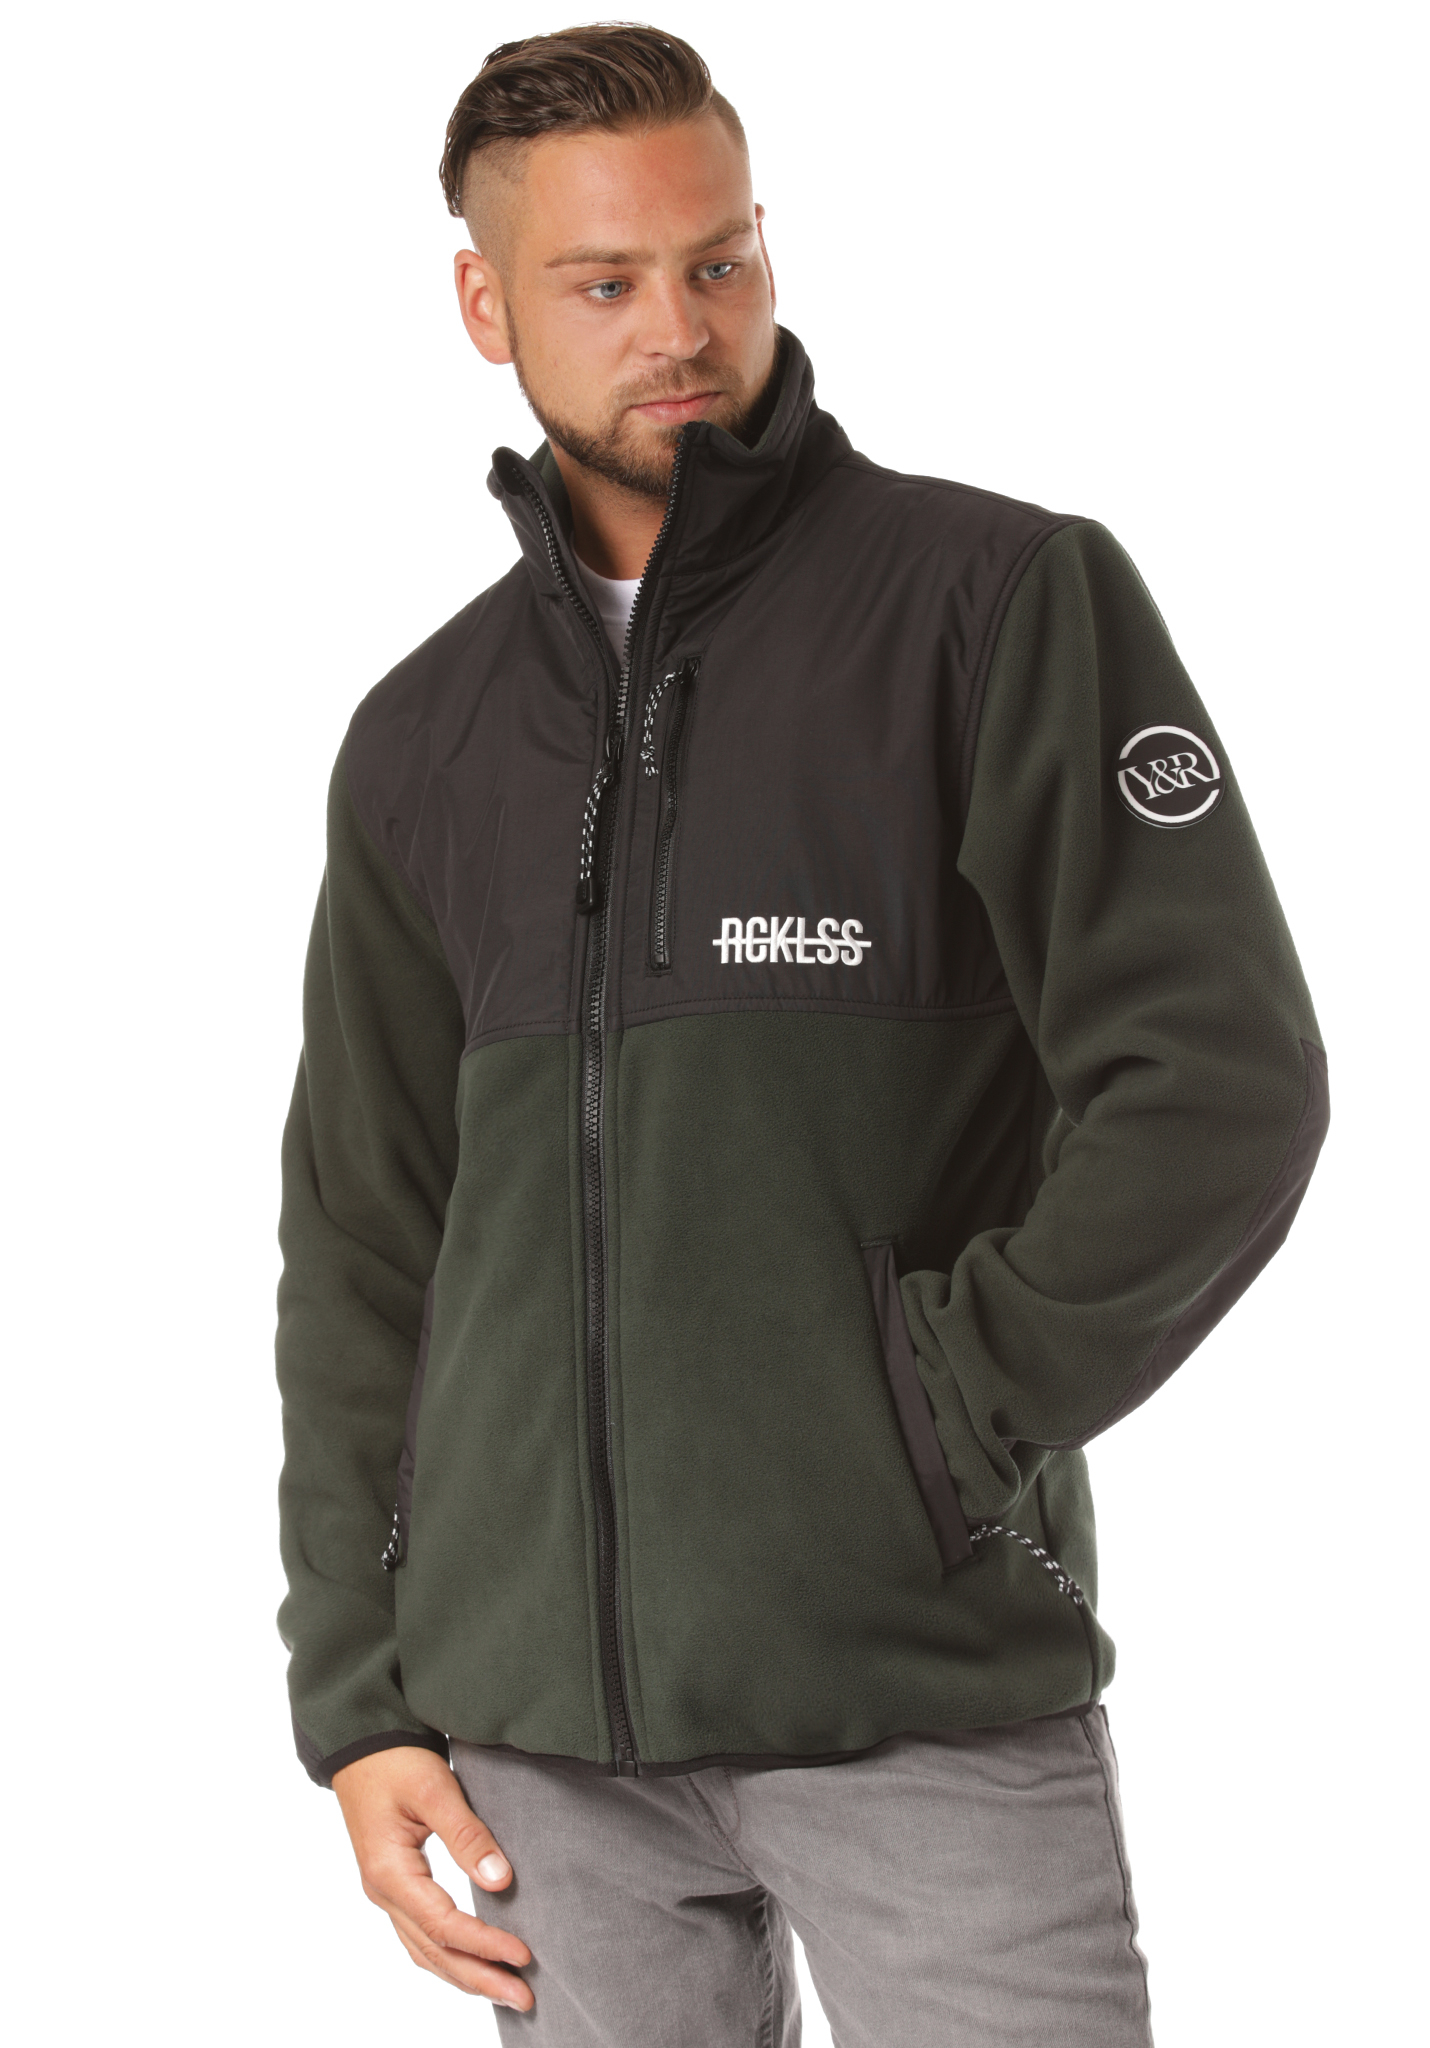 Young and Reckless Polar Fleece Jacke forest green XXL